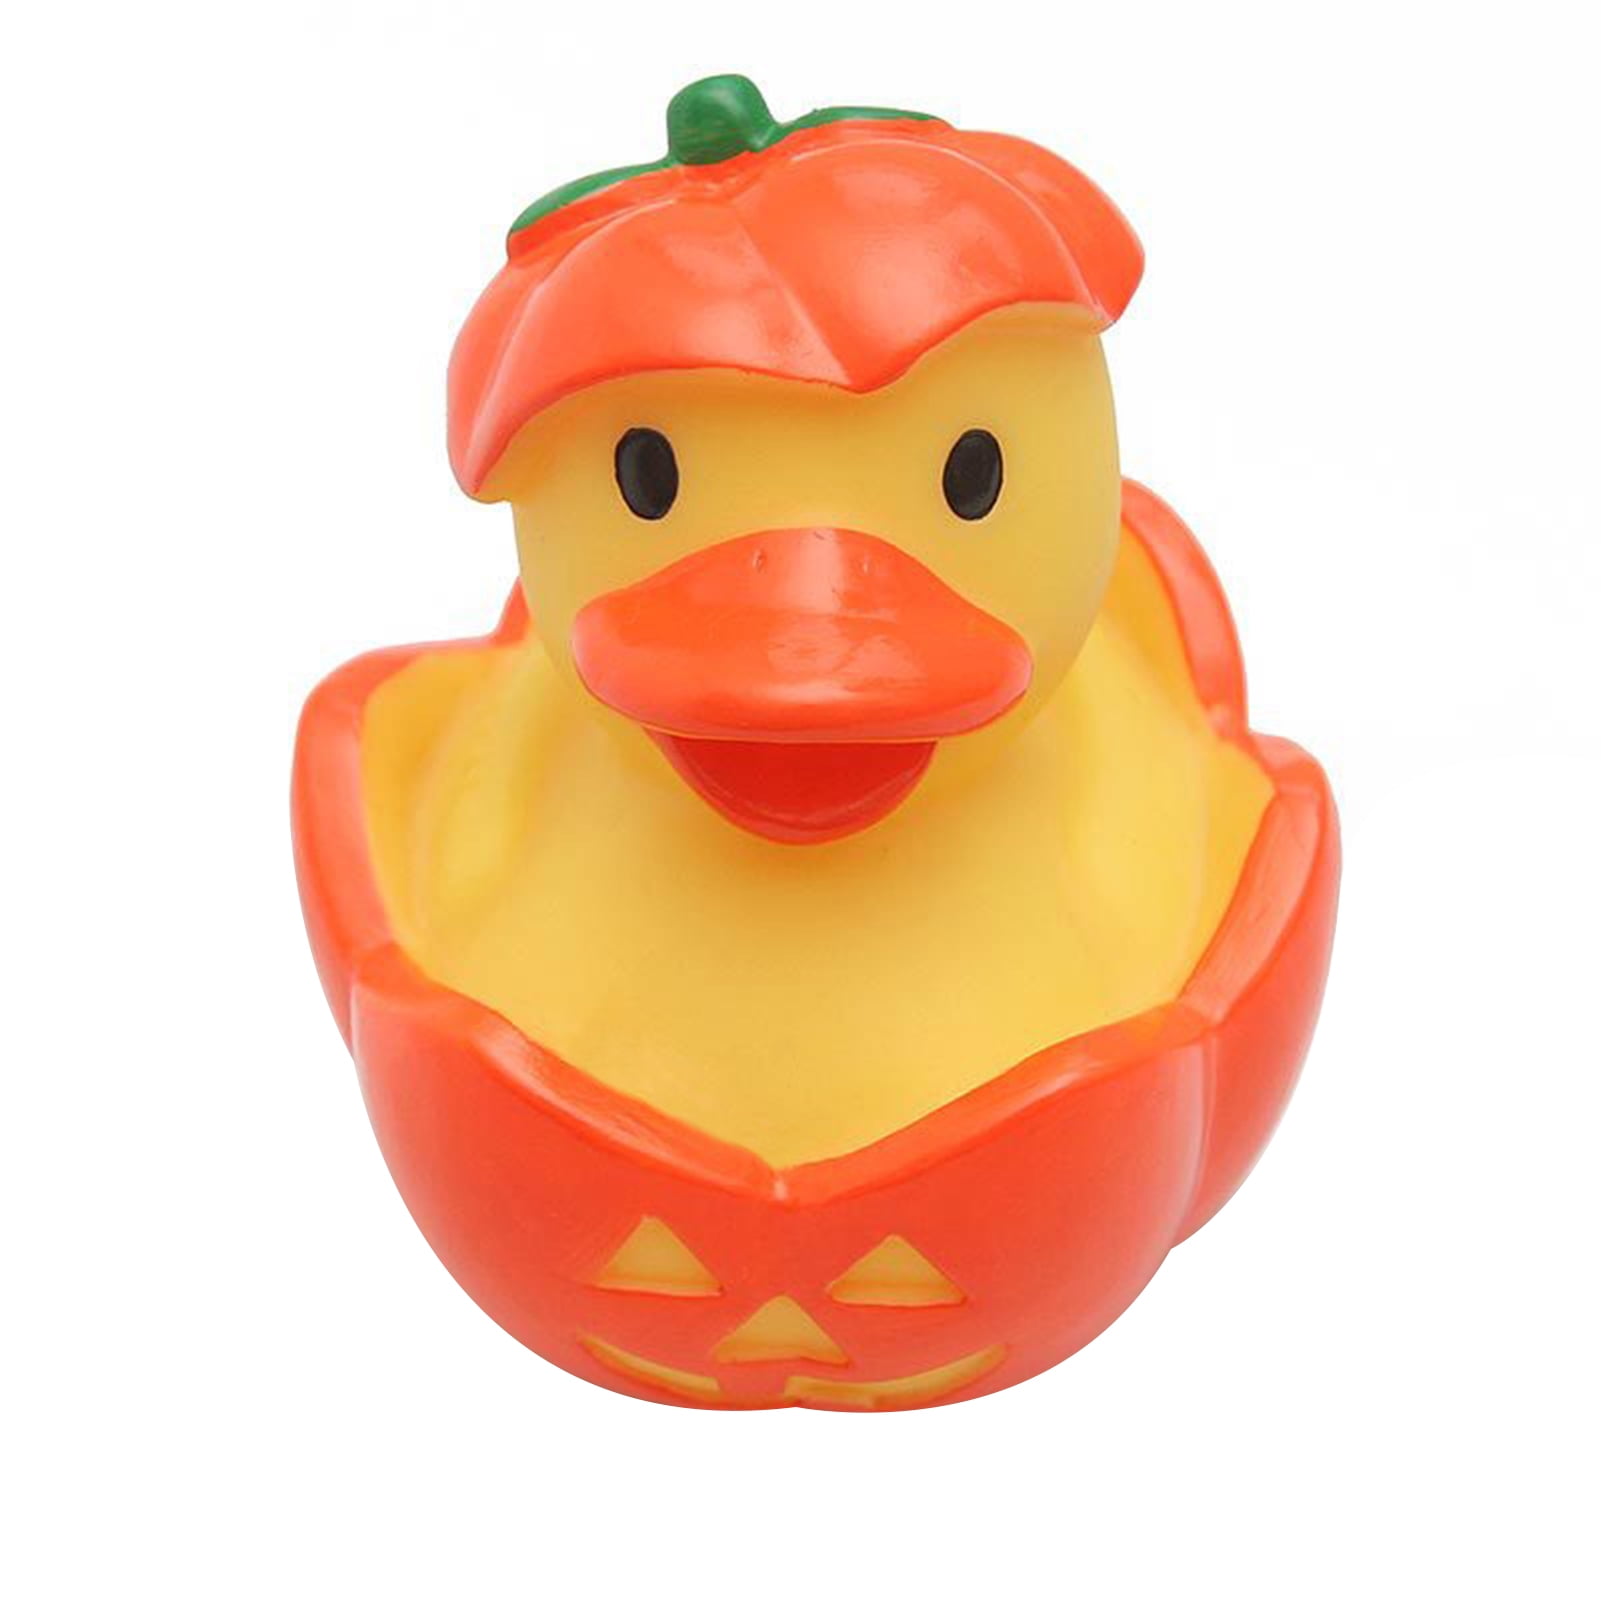 Mini Yellow Shower Rubber Duck Bath Toy whistling duck Play Kids Toddlers 